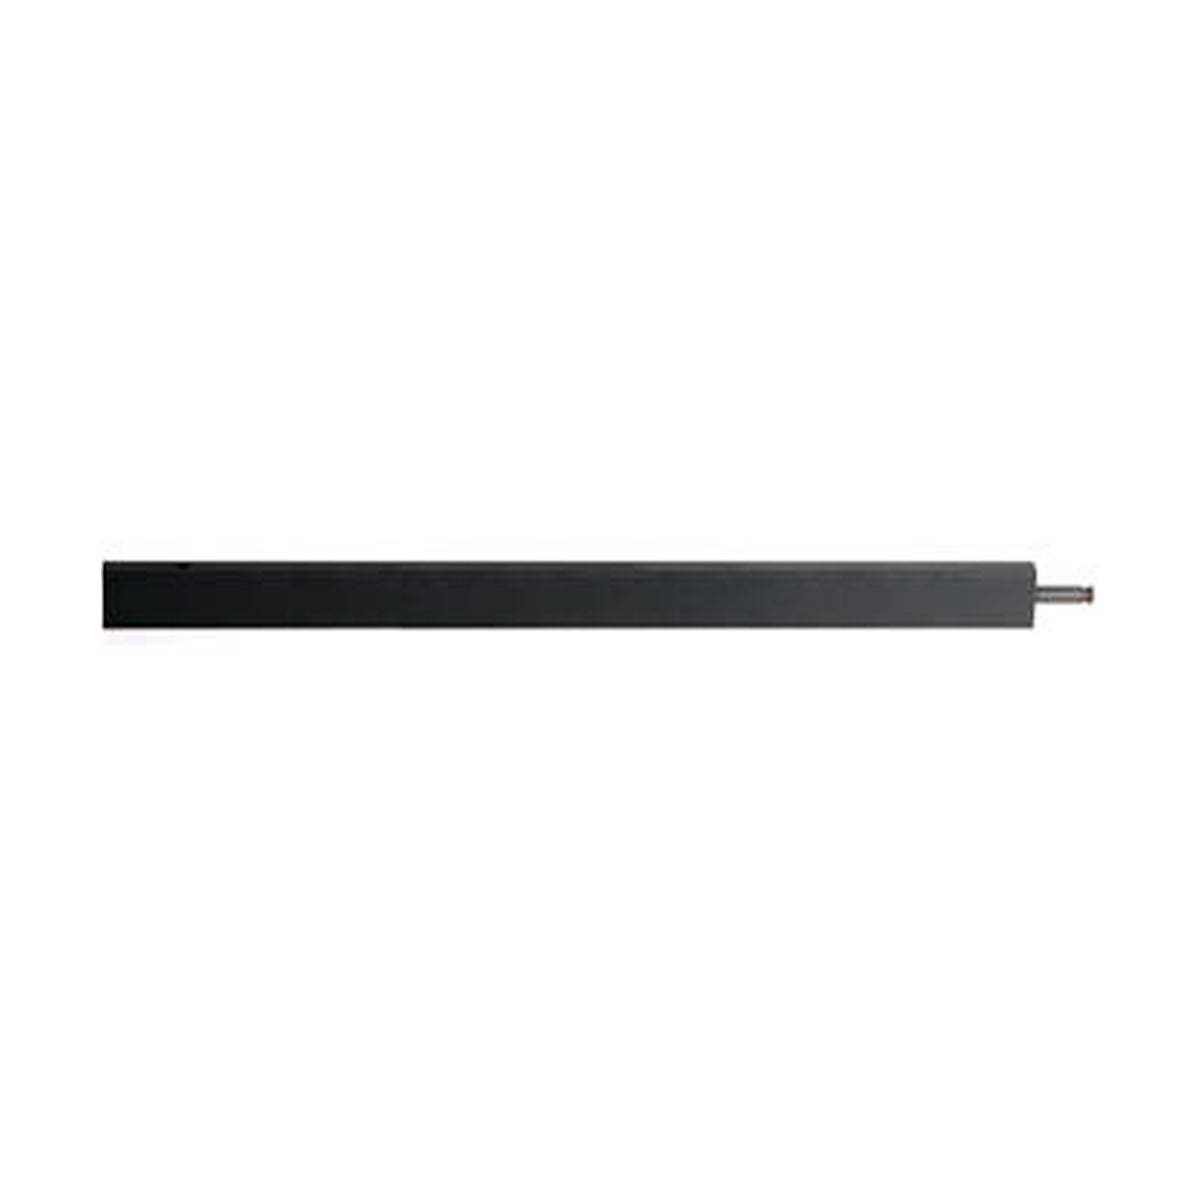 Cambo RD-1230 Head Extension 76cm (30")